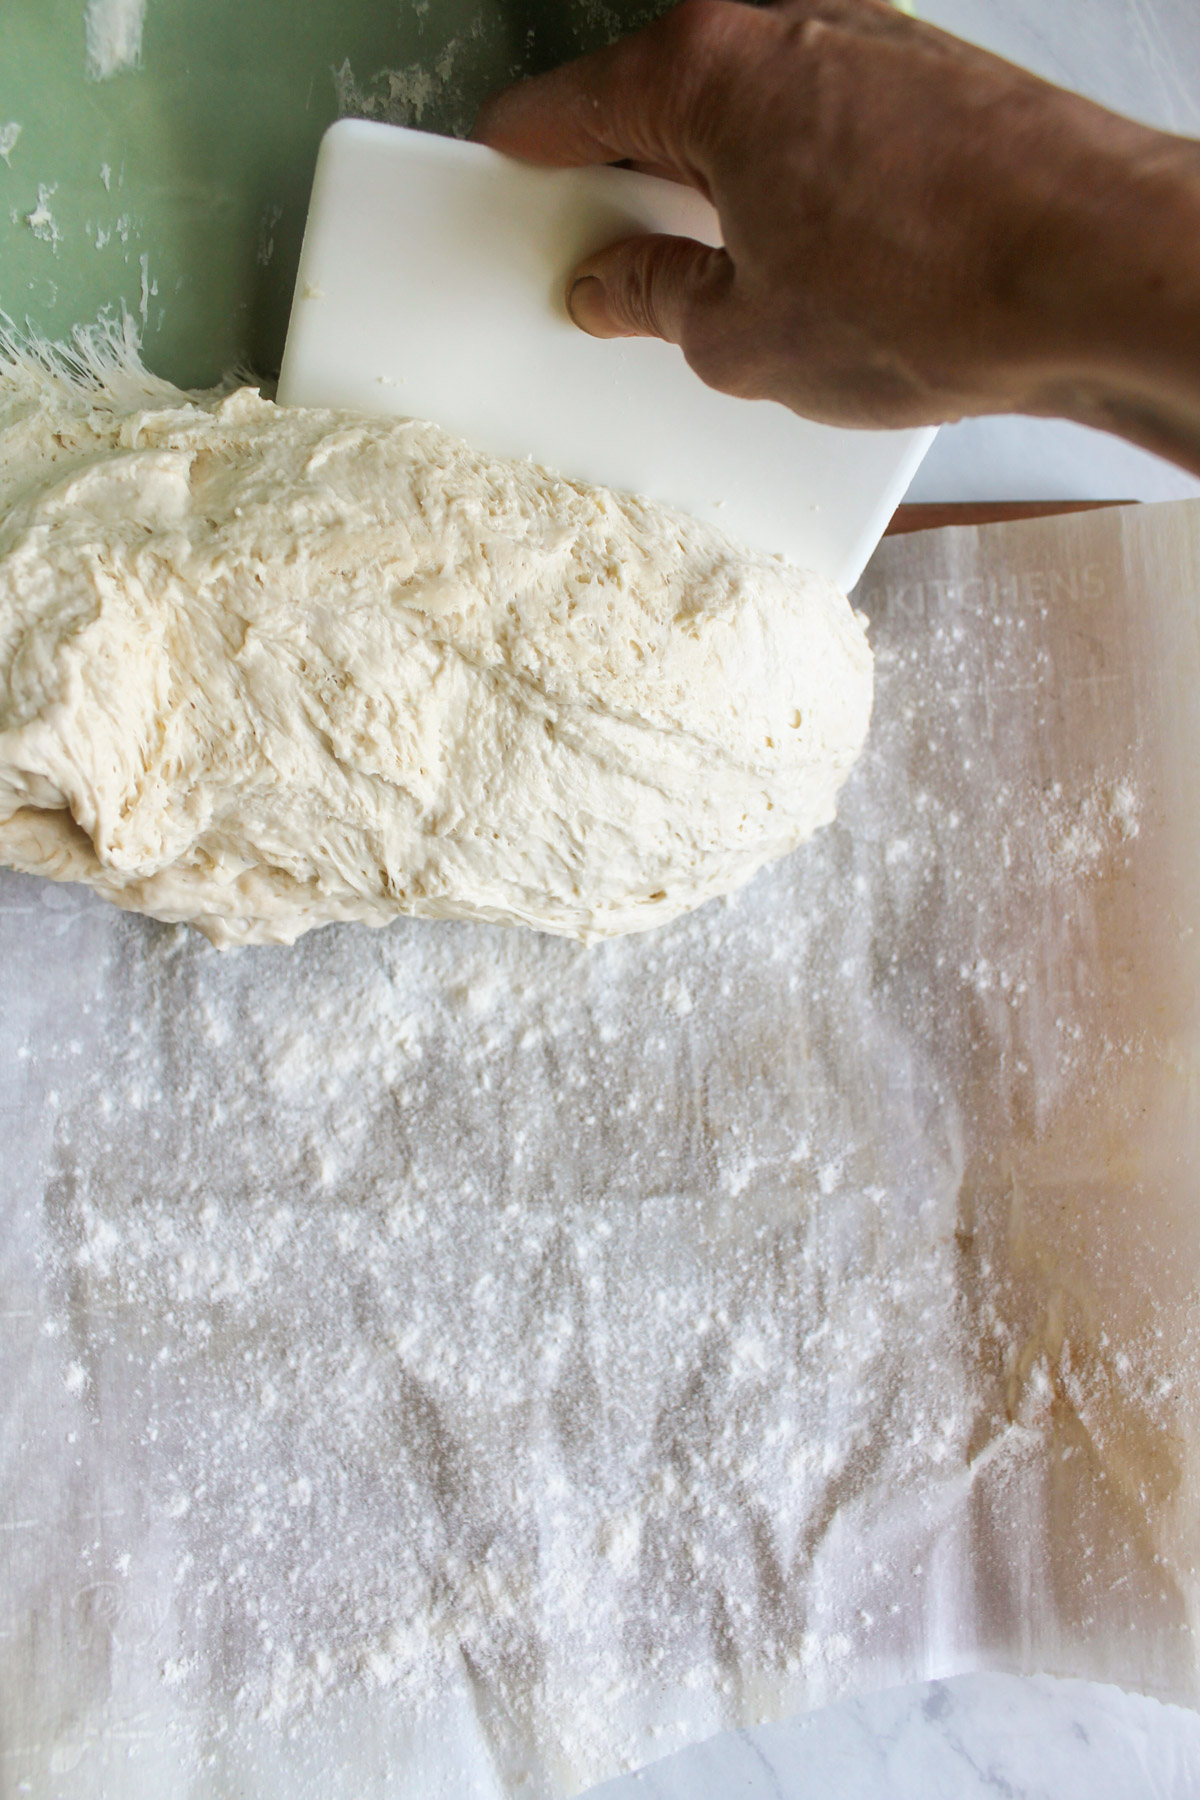 Removing the dough from the bowl onto floured parchment paper.